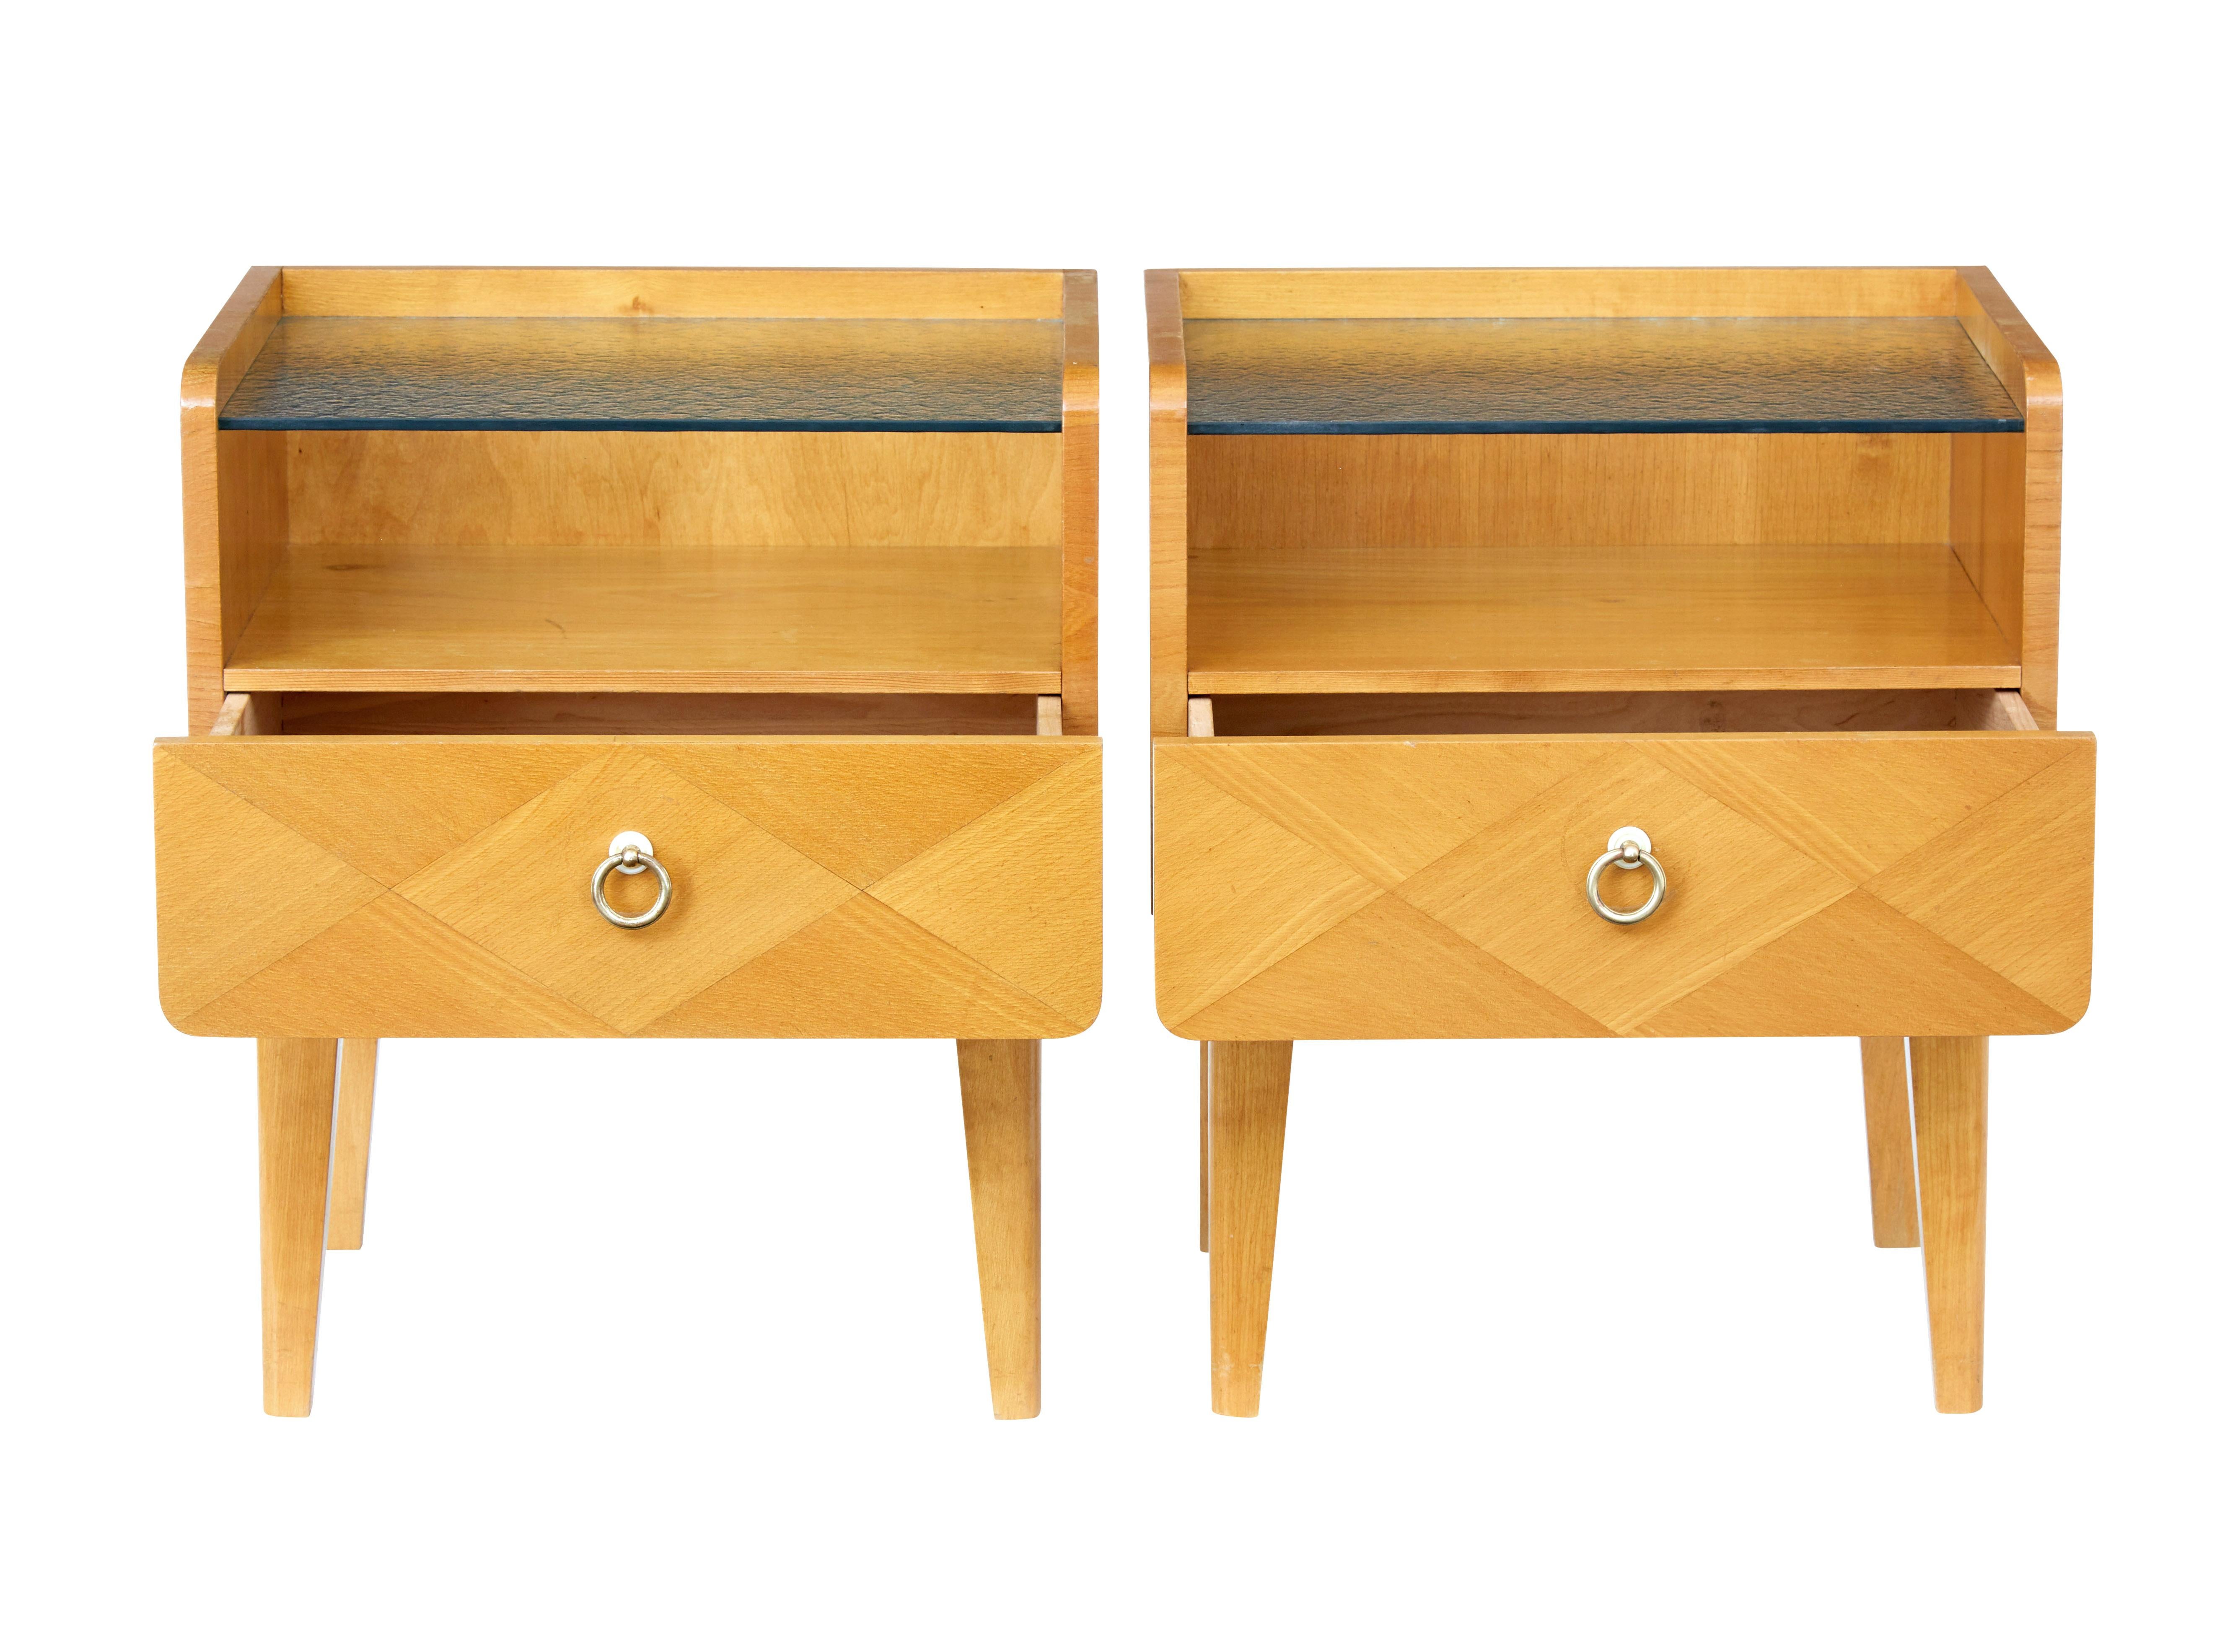 Good quality pair of Swedish elm bedside tables, circa 1960.

We have a pair of the same design in birch as these pair of tables. Frosted glass top surface with single drawer to the front.

Some marking and wear to wood work, ideally needing a